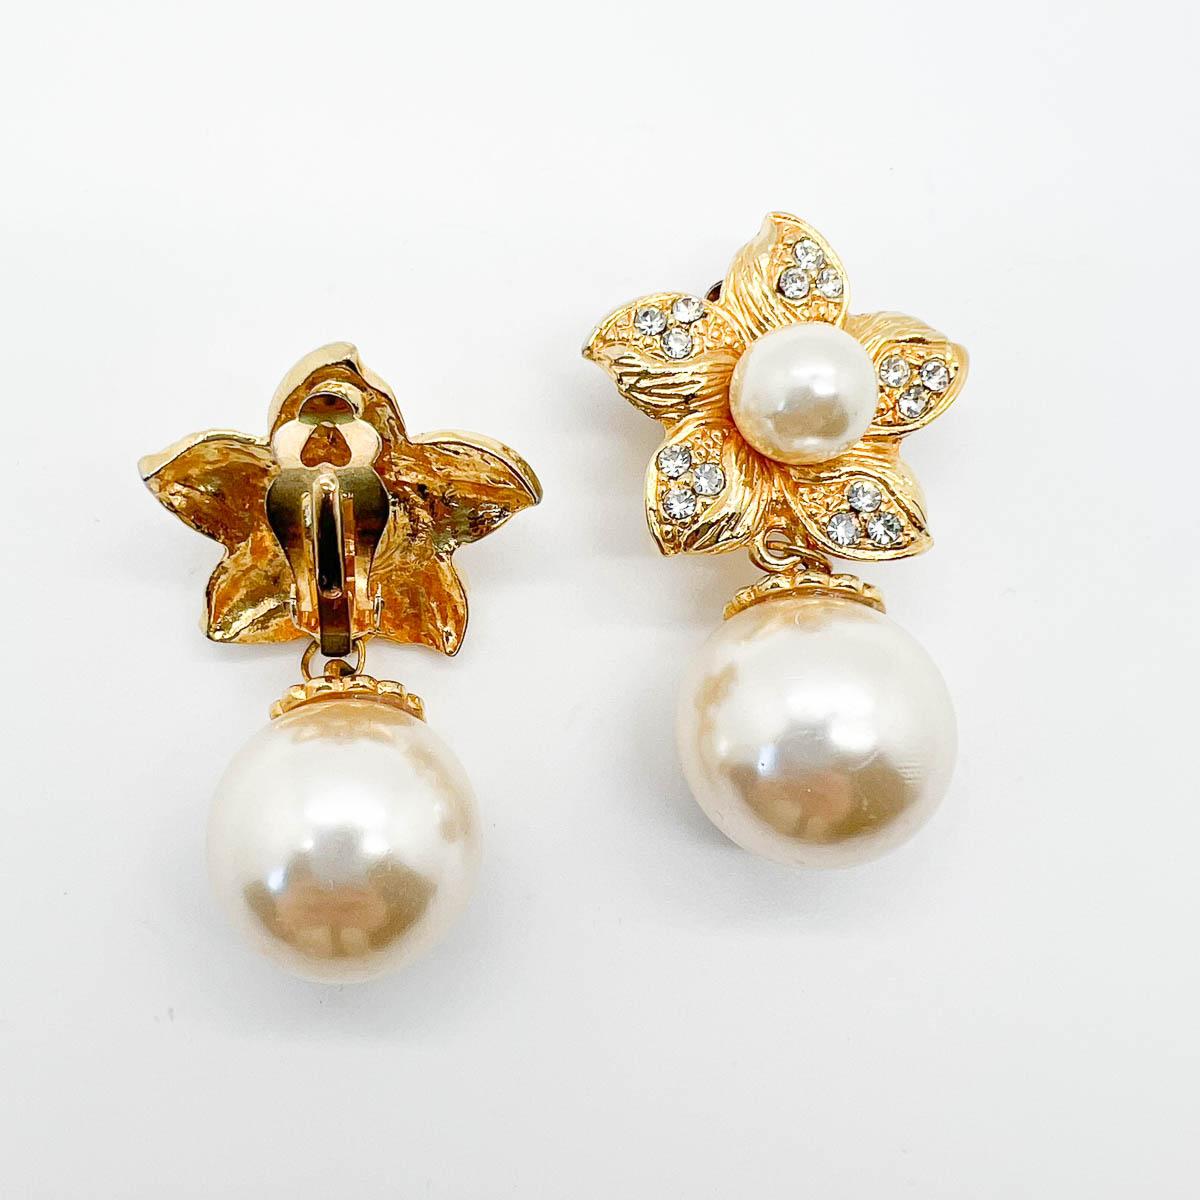 A pair of Vintage Pearl Flower Earrings. A delightful flower motif set with crystals proves high drama with the whole pearl centre and huge whole pearl drops. Utterly spellbinding earrings. 
An unsigned beauty. A rare treasure. Just because a jewel